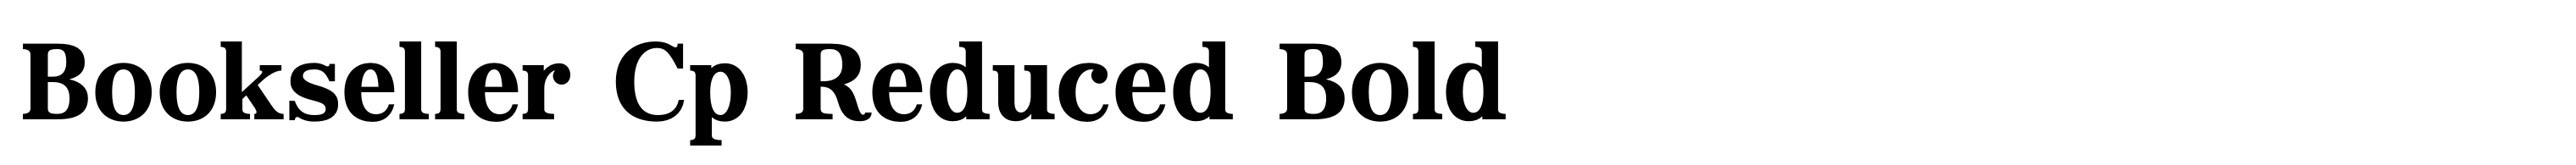 Bookseller Cp Reduced Bold